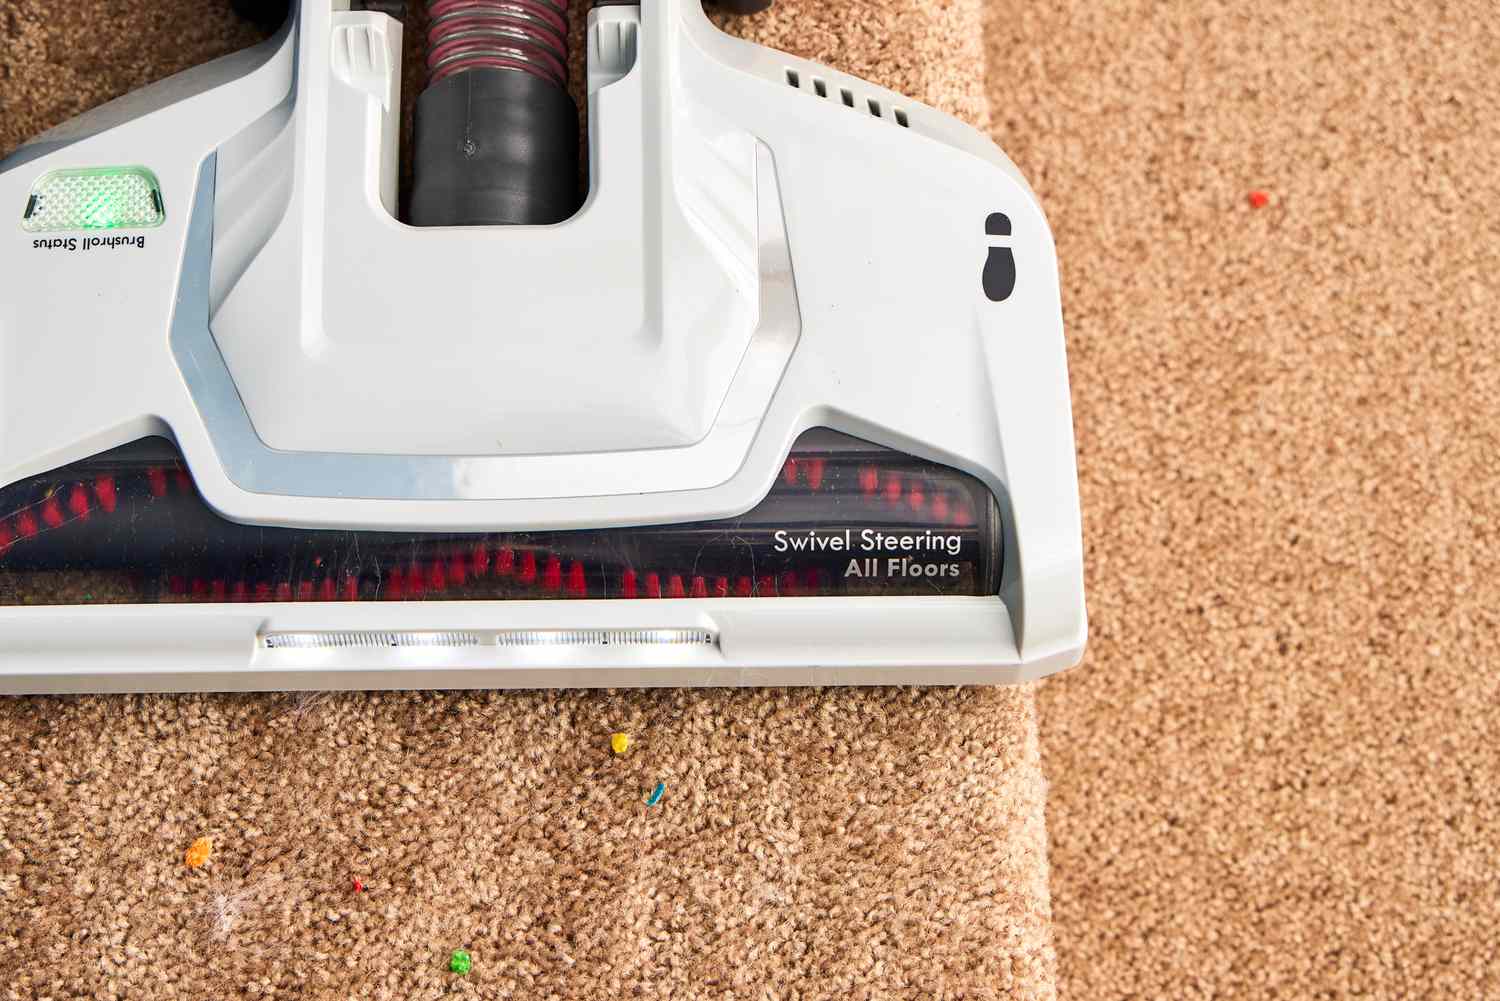 An overhead view of the top of the Kenmore Allergen Seal Bagless Upright Vacuum